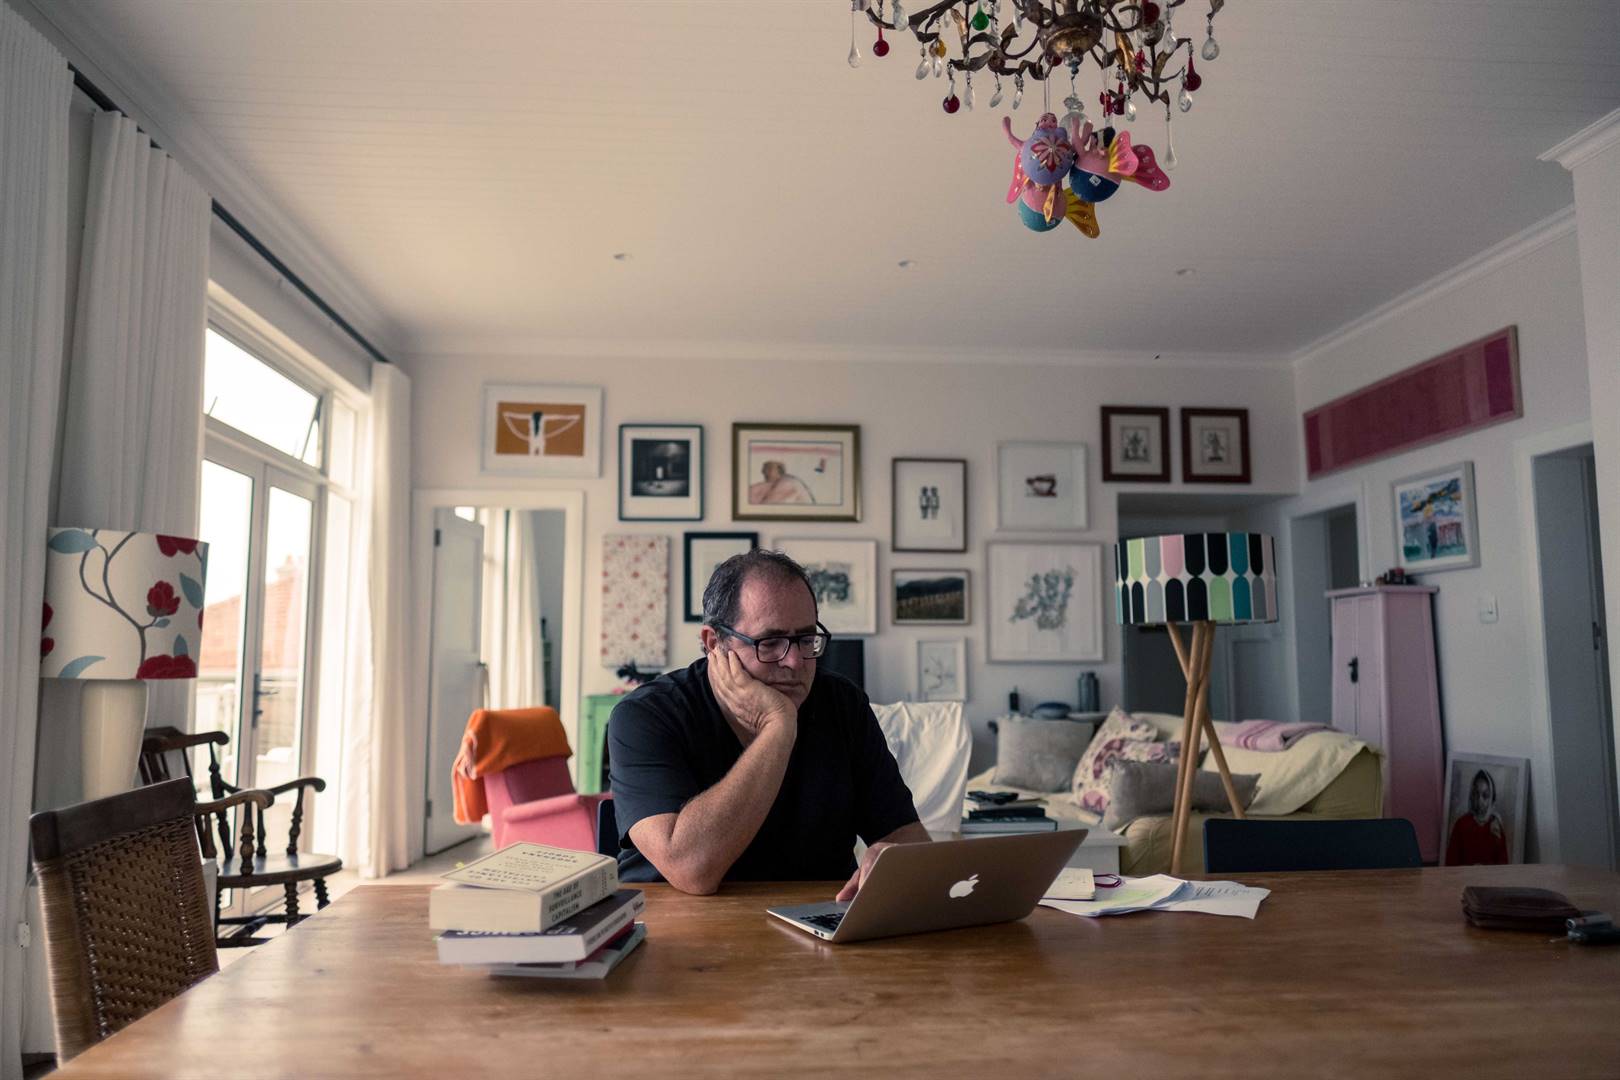 Mark Gevisser working at his home in Kalk Bay, a few years after his break-ins in Johannesburg. Photo: Tommy Trenchard